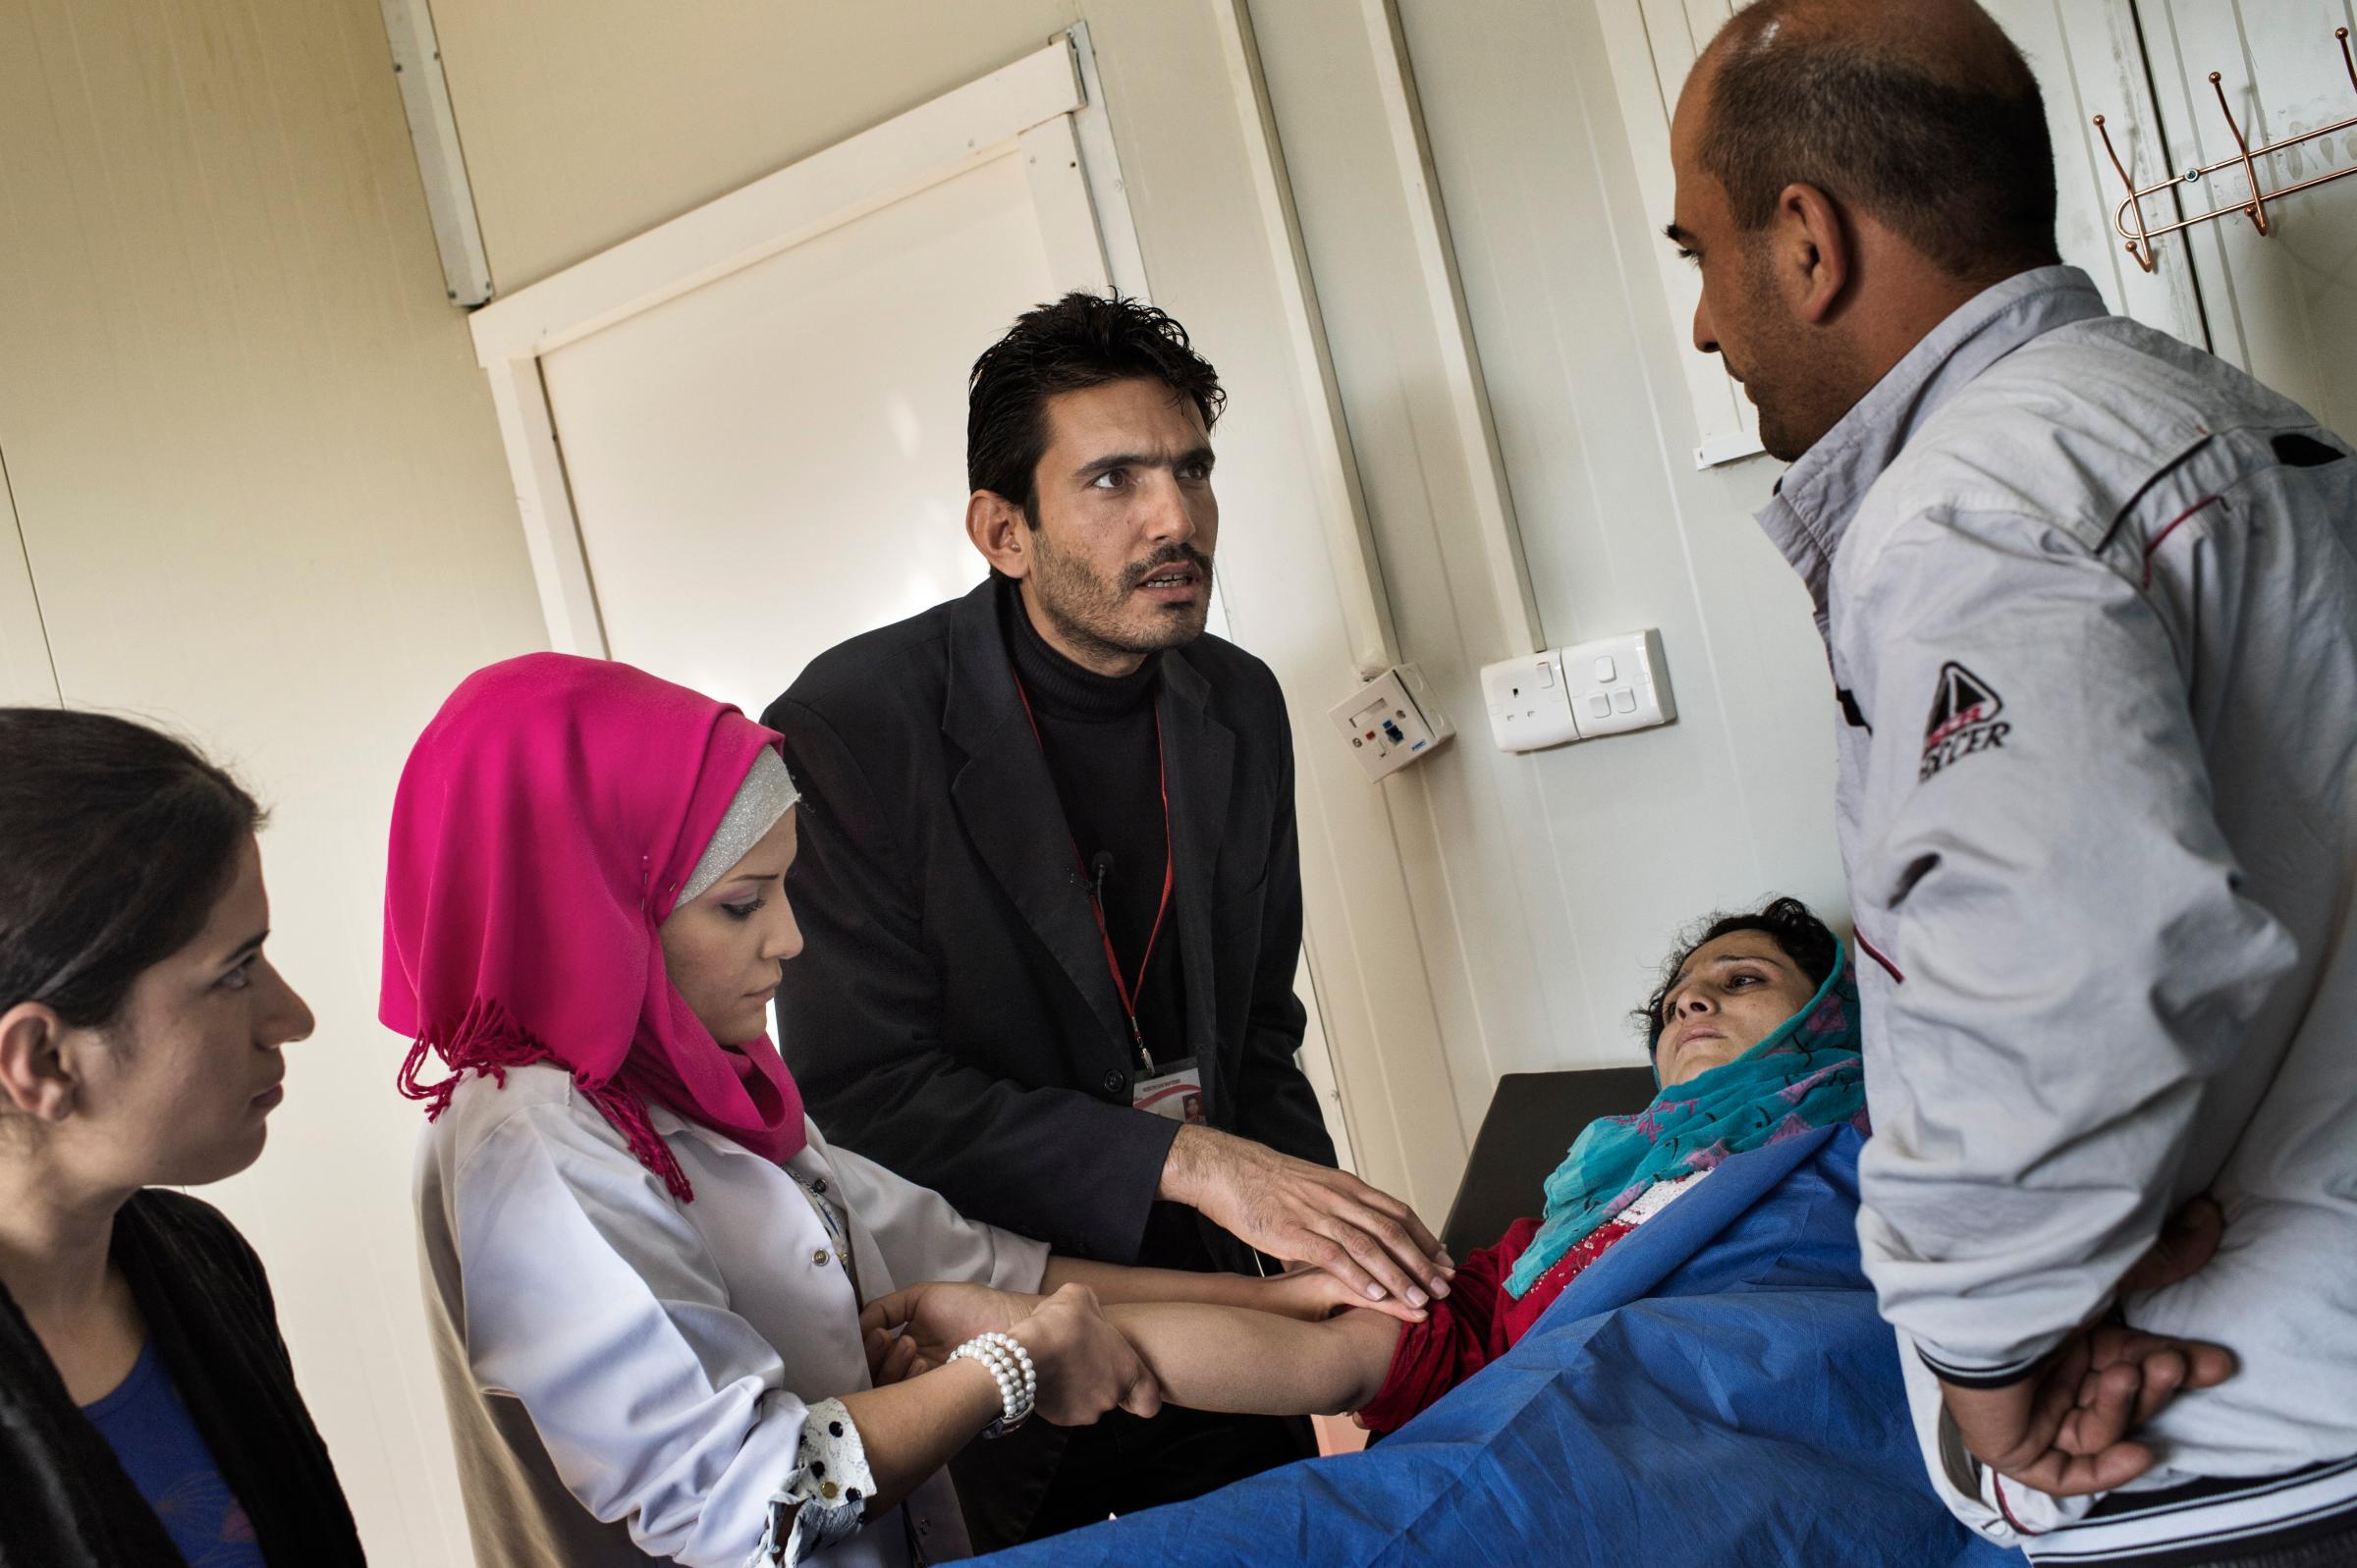 Dr. Mustapha Khalil, medical coordinator at the MSF health clinic in the Domiz refugee camp in northeast Iraq, tends to an ill patient, November 6, 2013. The clinic provides primary health services to the camp's approximately 60,000 refugees from Syria. Domiz Refugee Camp was established by local authorities back on in April 2012 to host the Syrian Kurds. The camp located 20 kms southeast of Dohuk city, in Iraqi Kurdistan and some 60 km from Syria/Iraq border. So far the total number of Syrian refugees in Kurdistan region is 60,151.